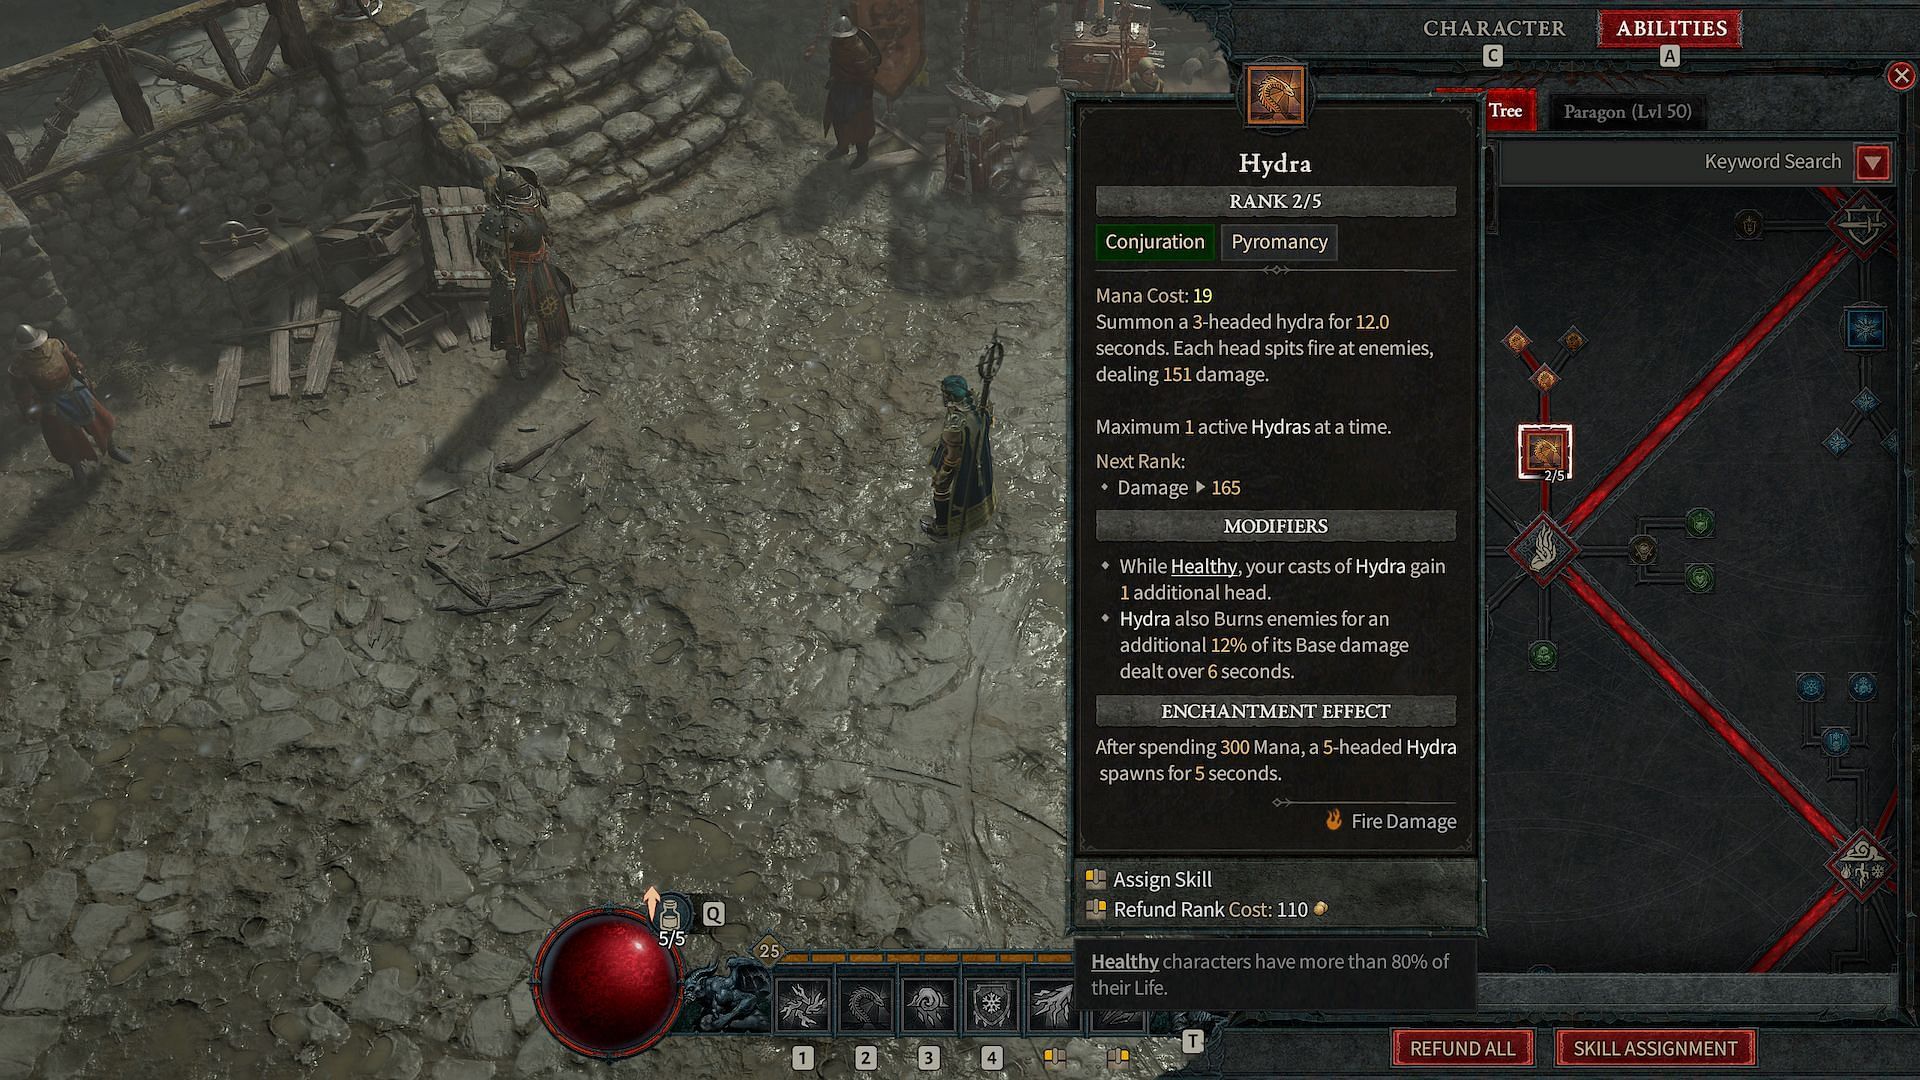 Hydra is one of the crucial skills for this build (Image via Diablo 4)